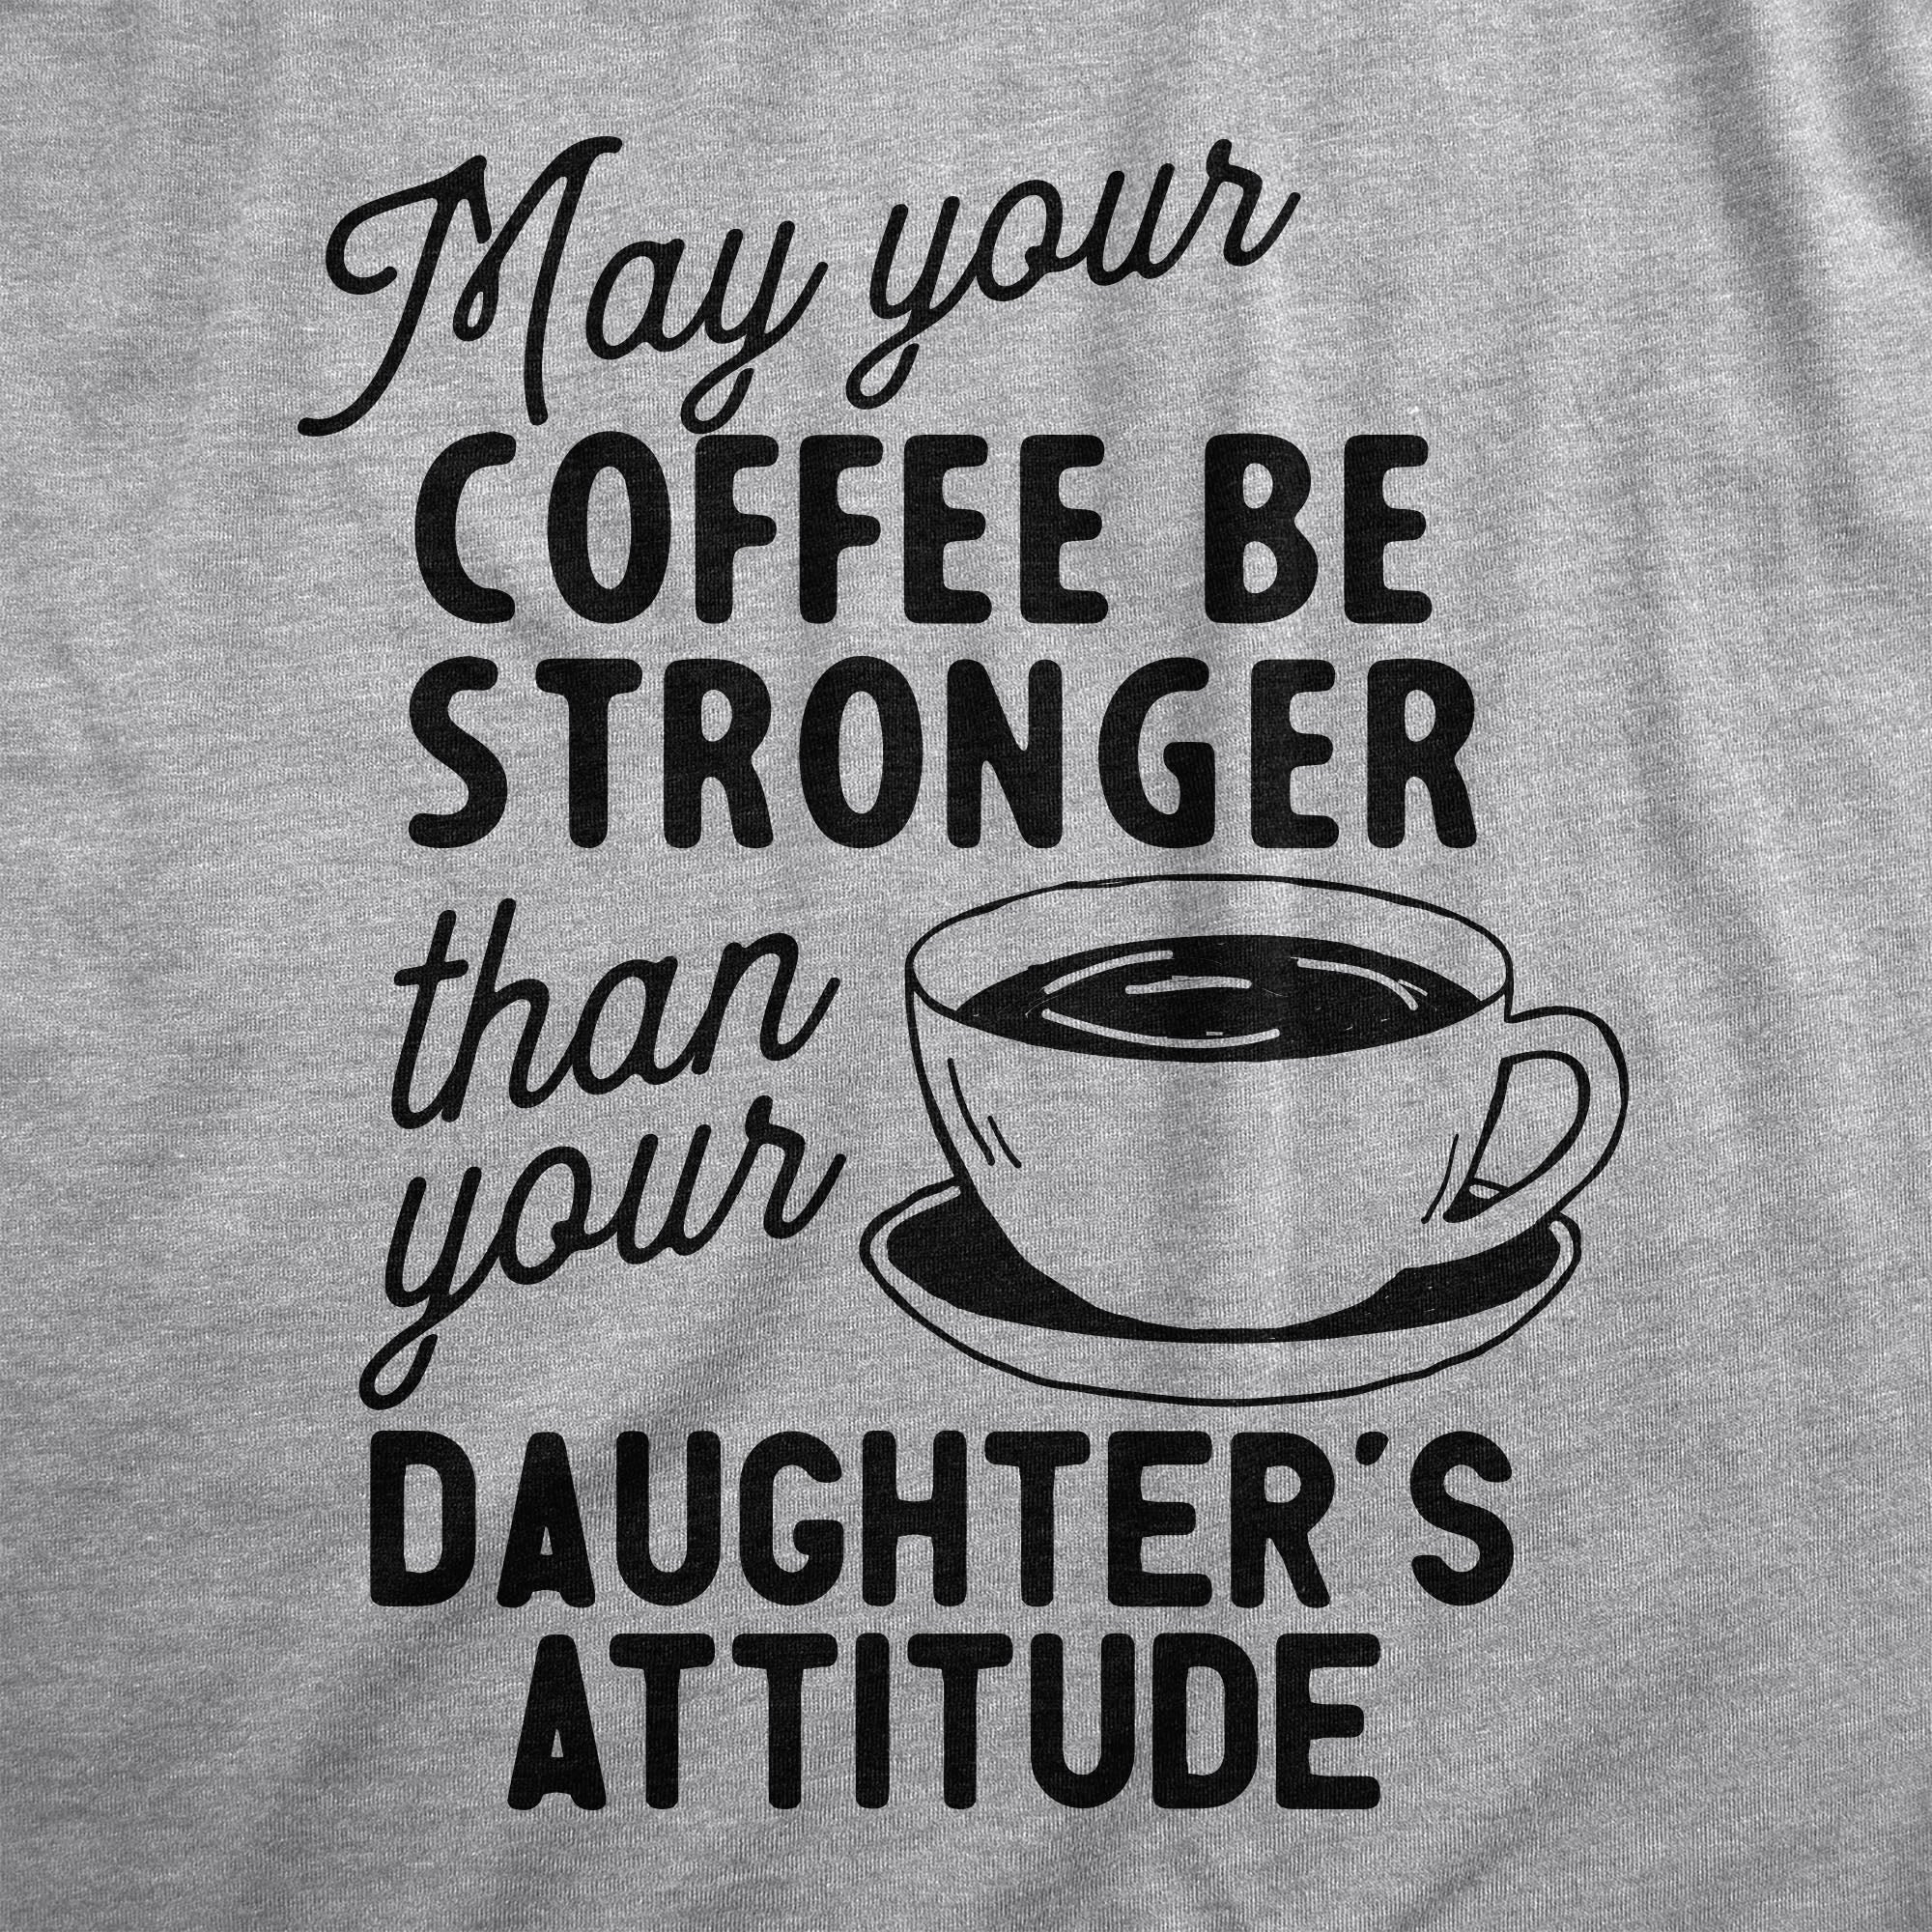 Funny Light Heather Grey - Coffee Stronger Coffee Stronger Than Your Daughter's Attitude Womens T Shirt Nerdy Mother's Day Coffee Daughter Sarcastic Tee